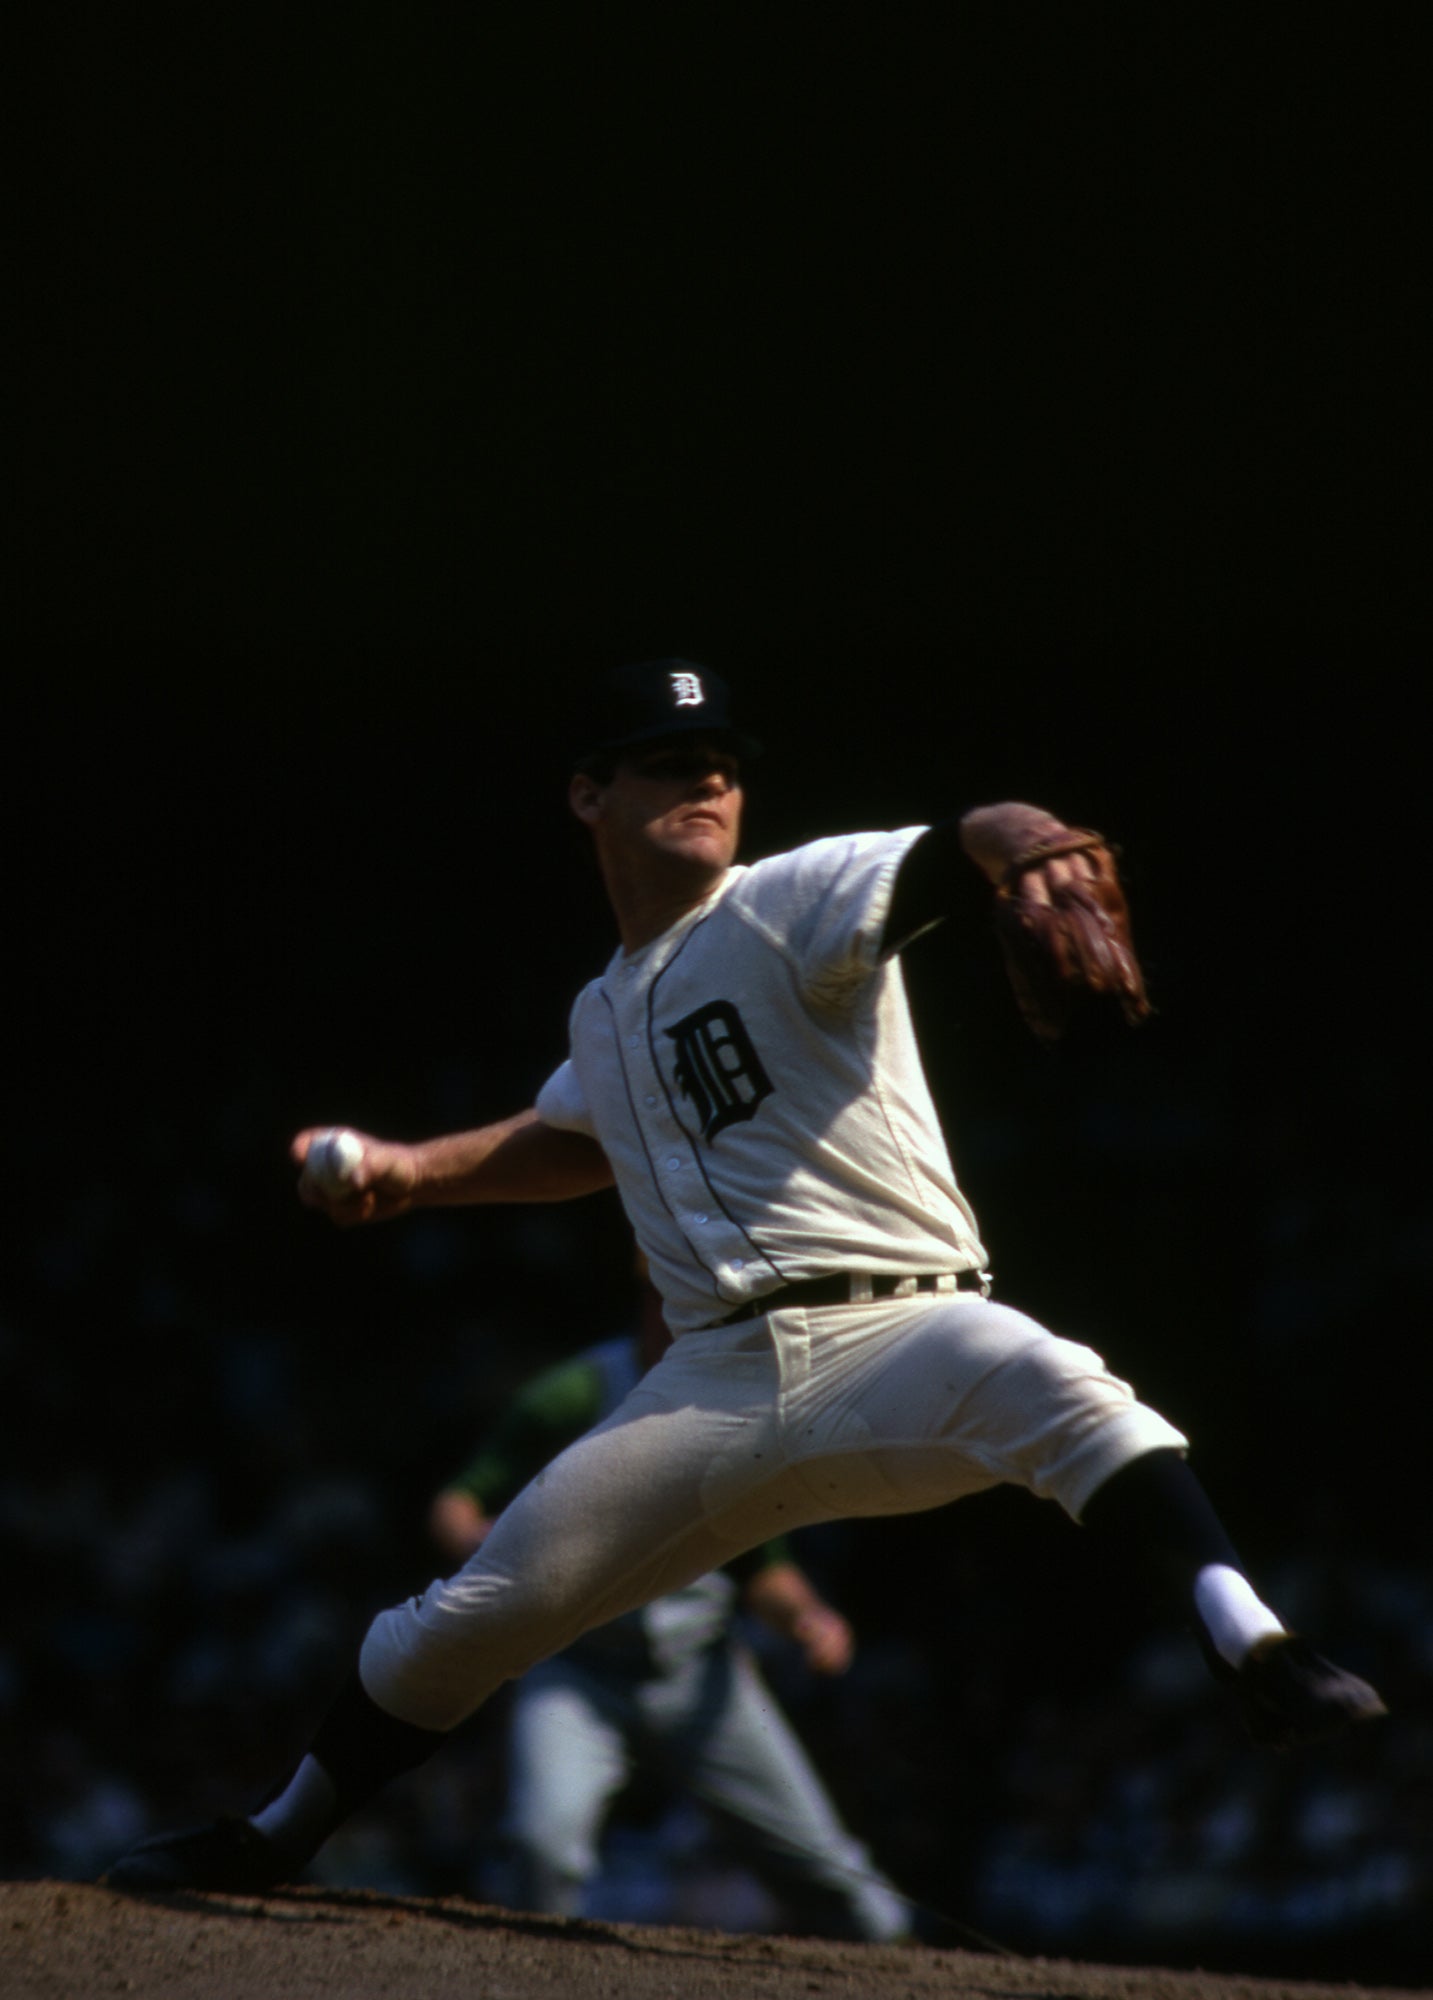 Denny McLain music, videos, stats, and photos